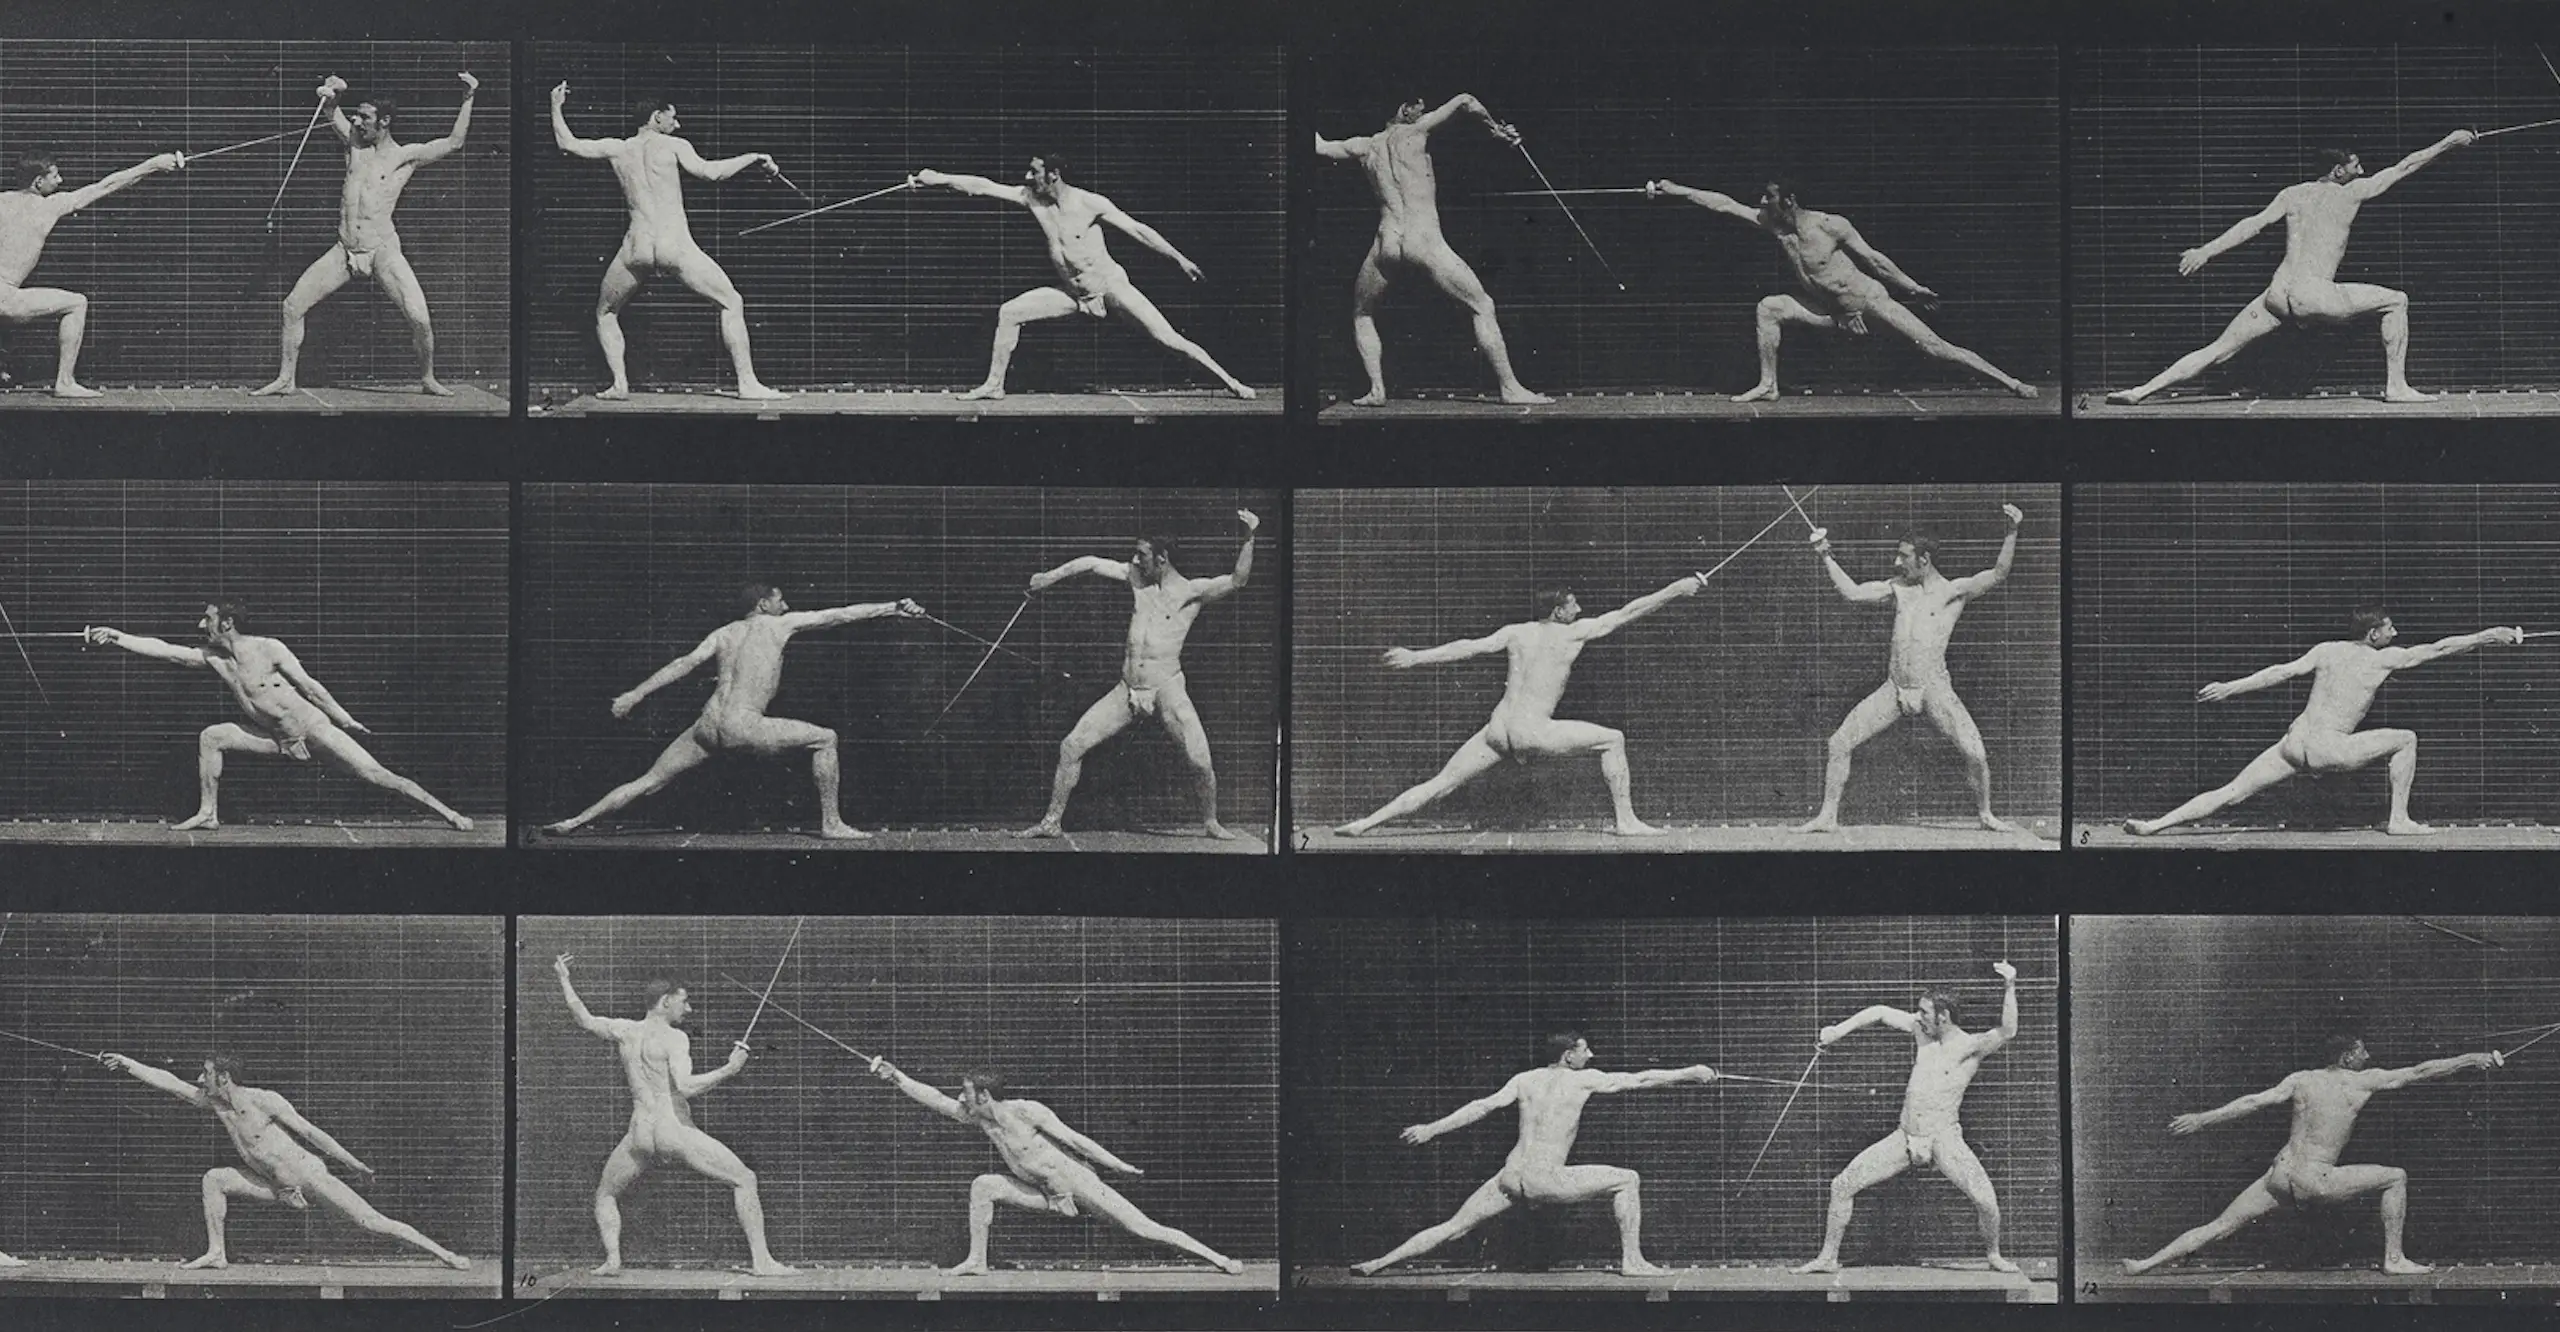 A grid of photographs showing a time lapse of two men, naked but for a loin cloth, fencing.